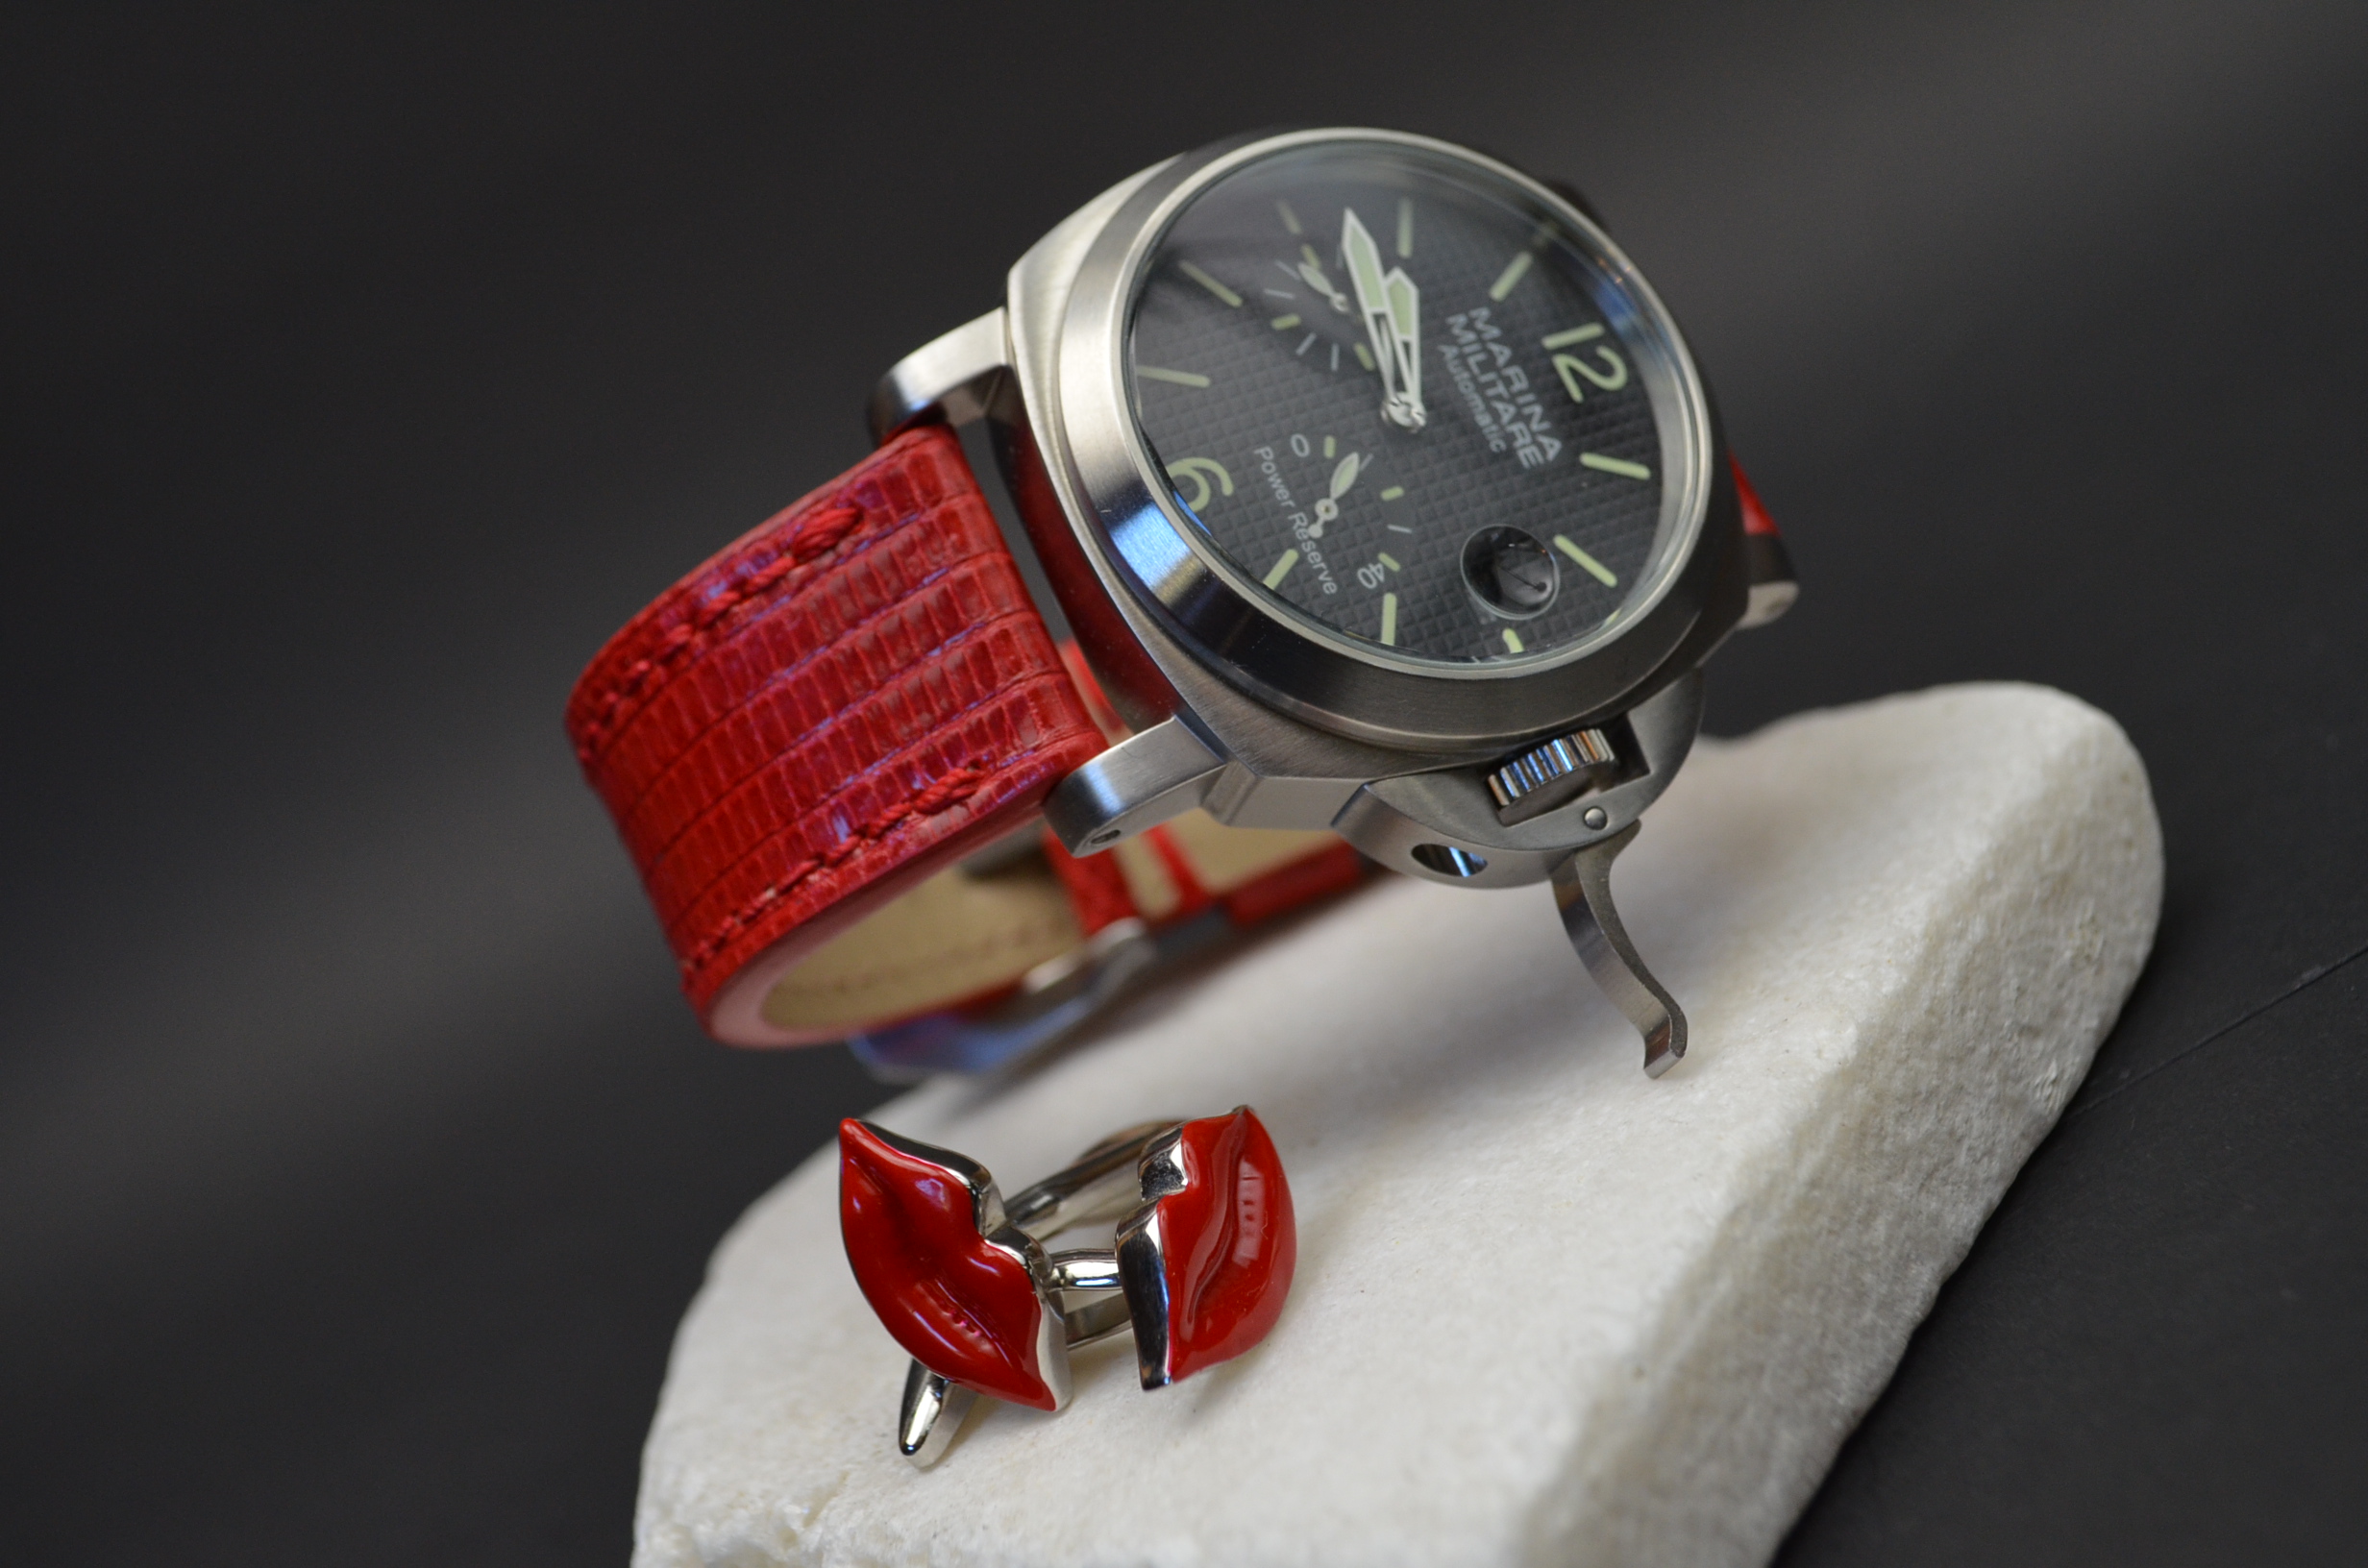 RED SHINY is one of our hand crafted watch straps. Available in red color, 3.5 - 4 mm thick.